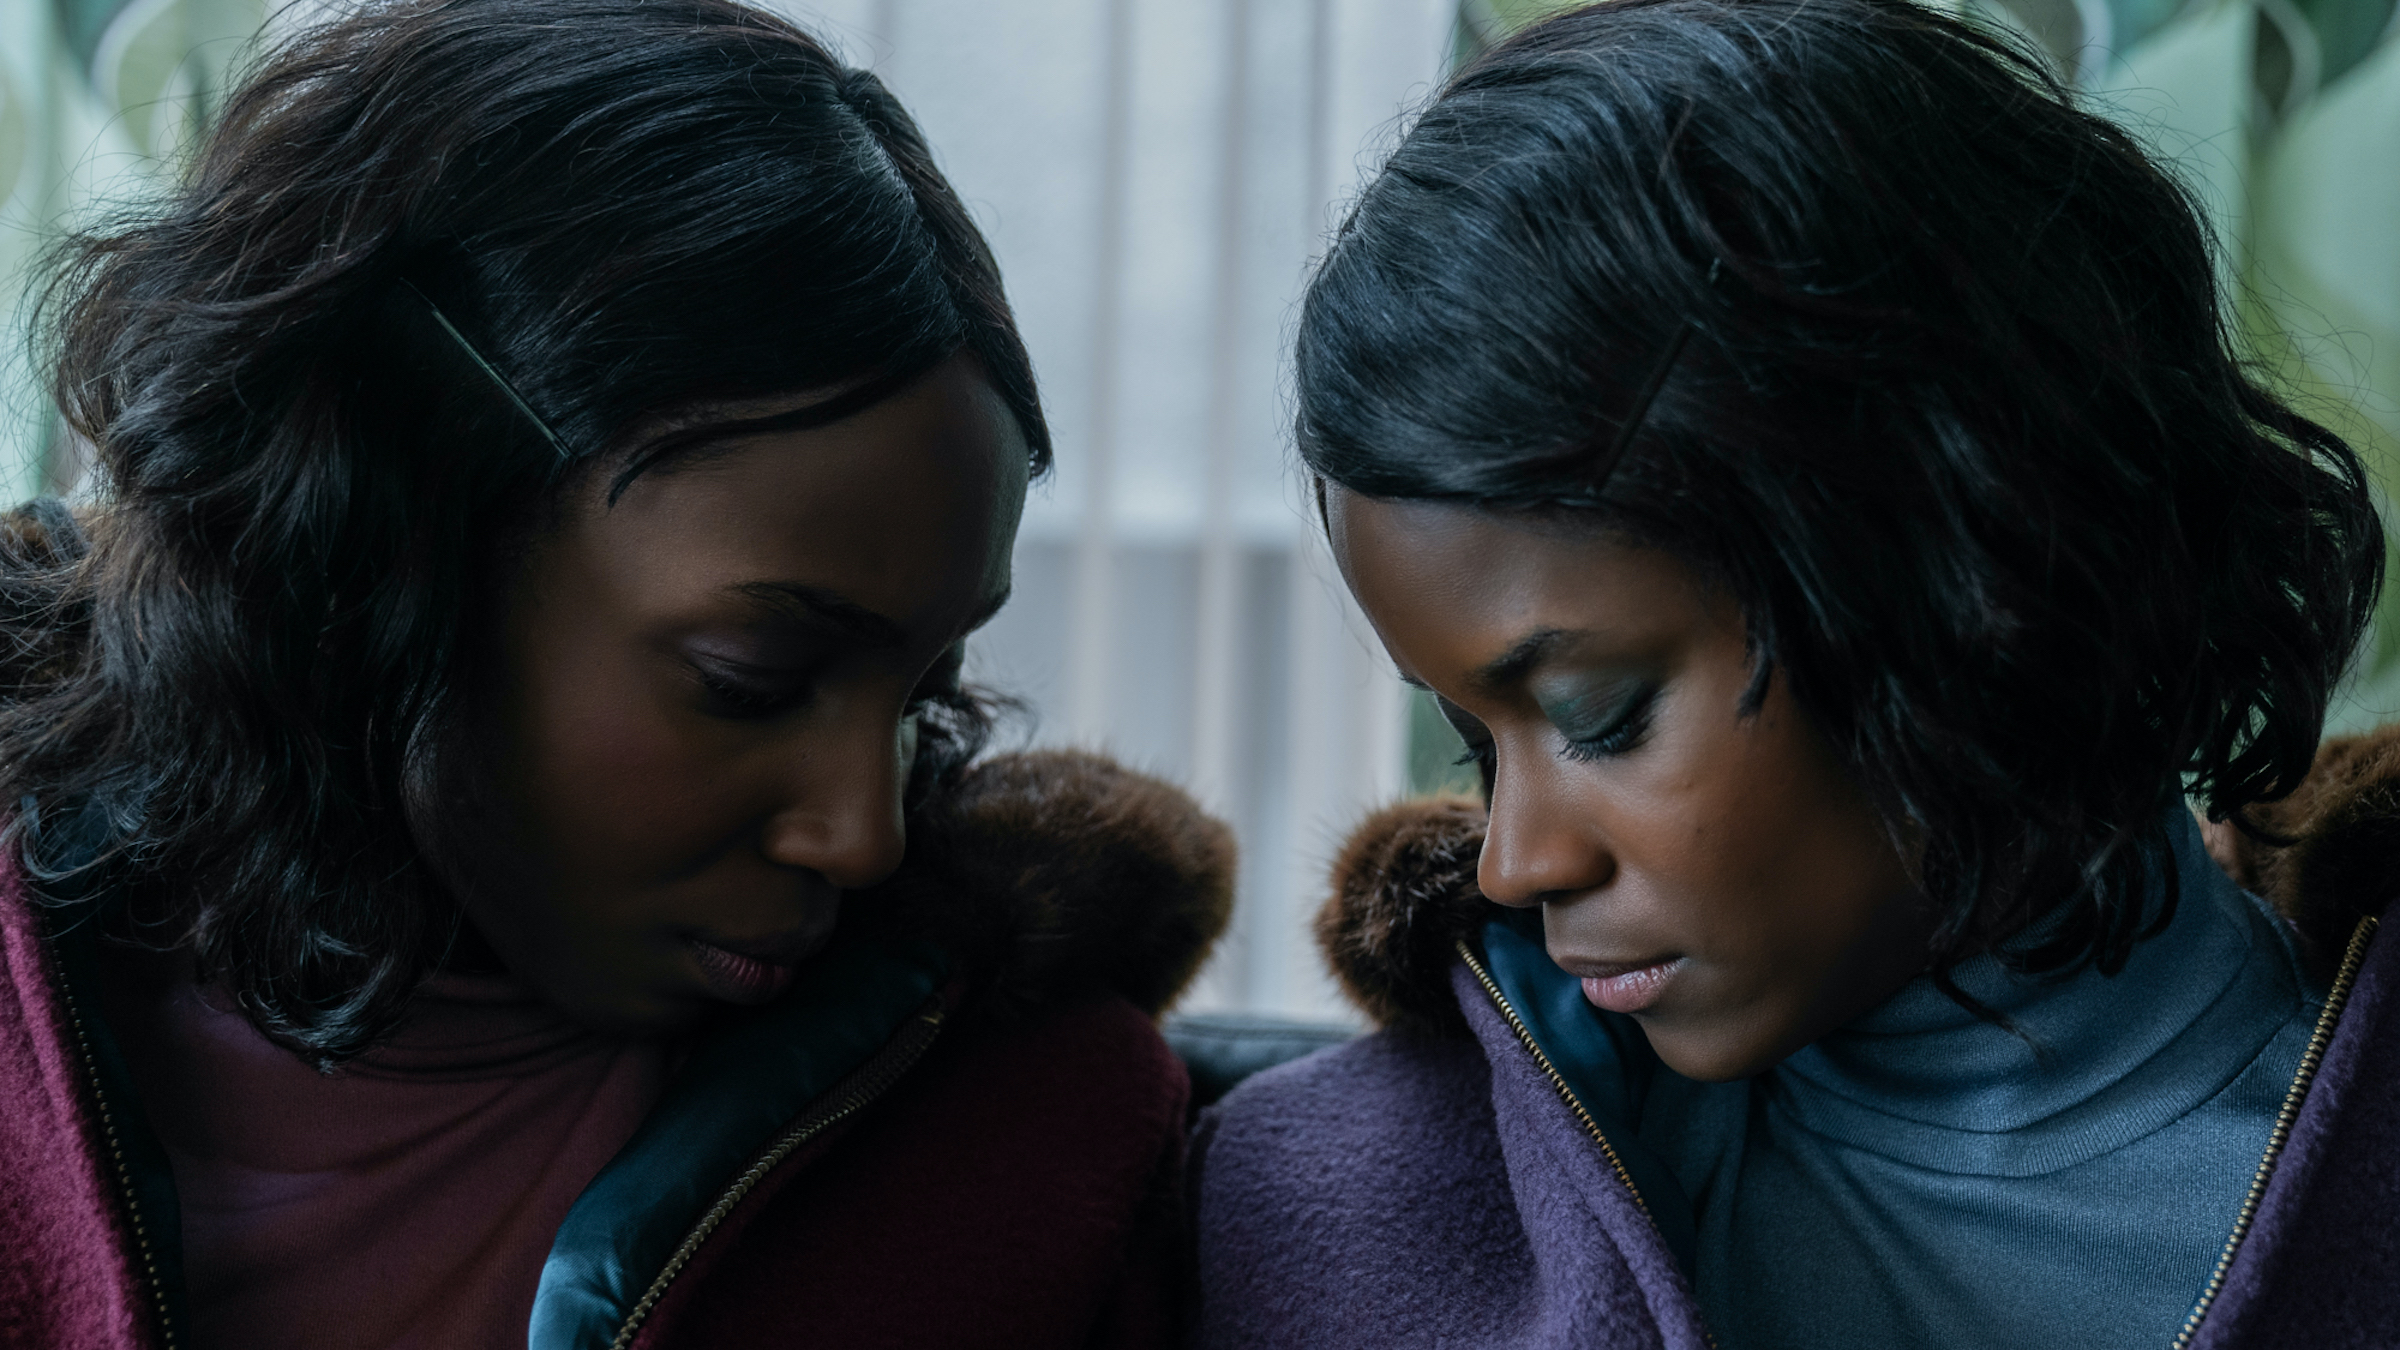 Tamara Lawrance as Jennifer Gibbons and Letitia Wright as June Gibbons gaze down and toward each other, dressed in pink and blue, respectively